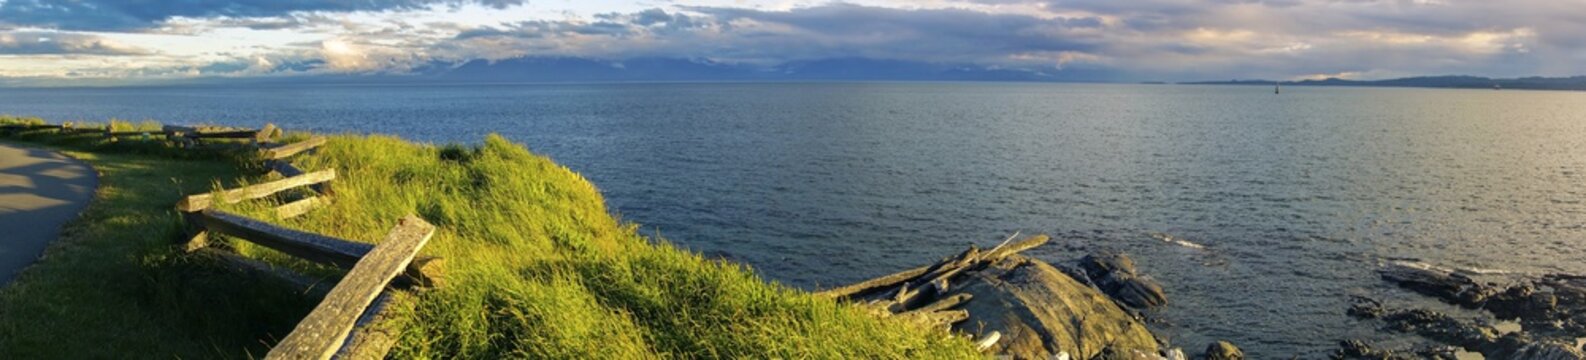 Wide Panoramic Seascape View of Juan De Fuca Strait and Distant Olympic Peninsula from Dallas Street Waterfront, Victoria BC Vancouver Island Canada